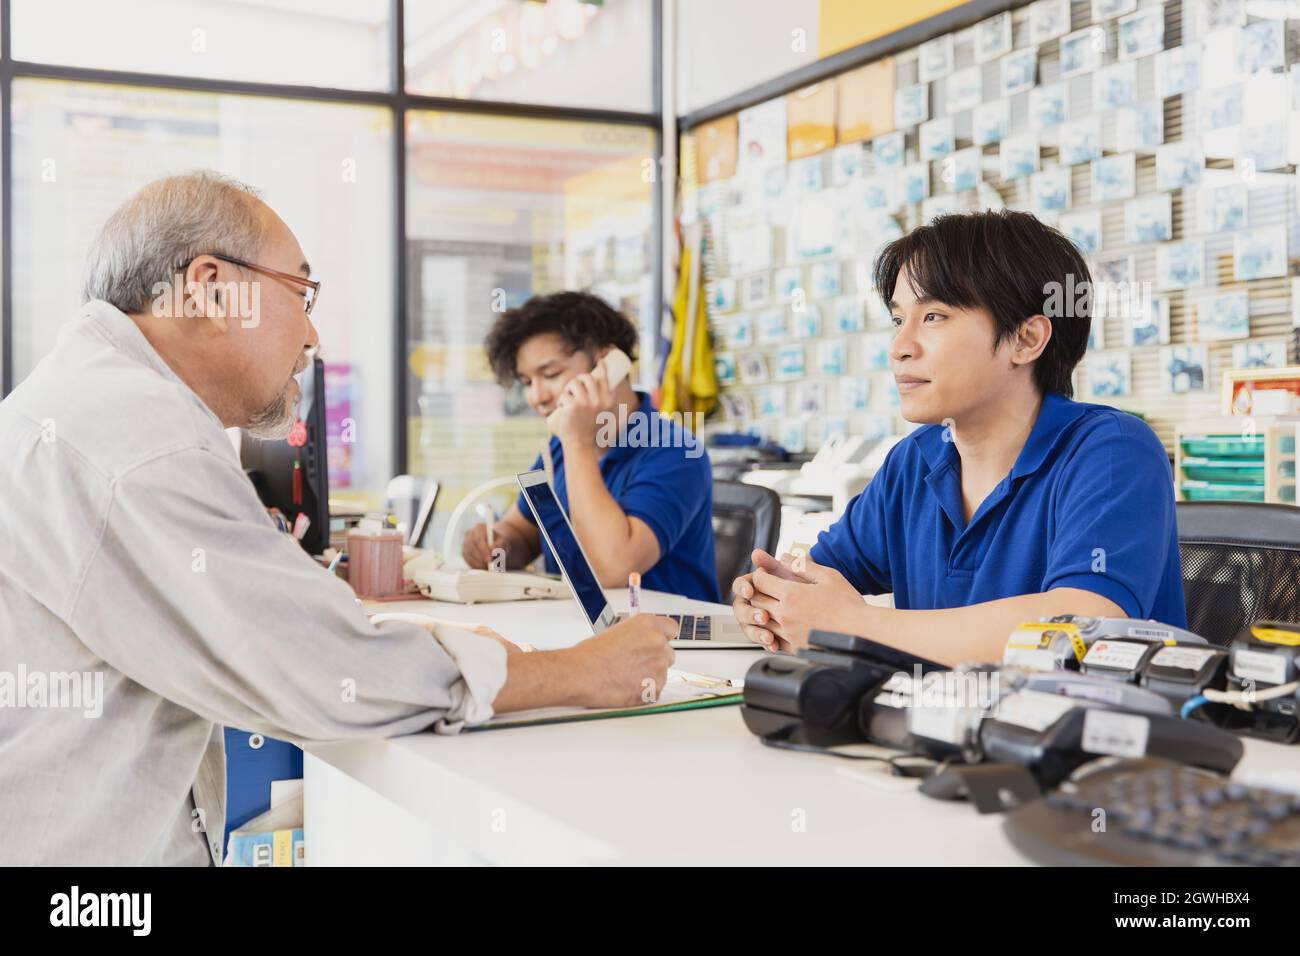 Customer sign contract document to apply membership and talk to reception male staff at counter service in business shop. Stock Photo